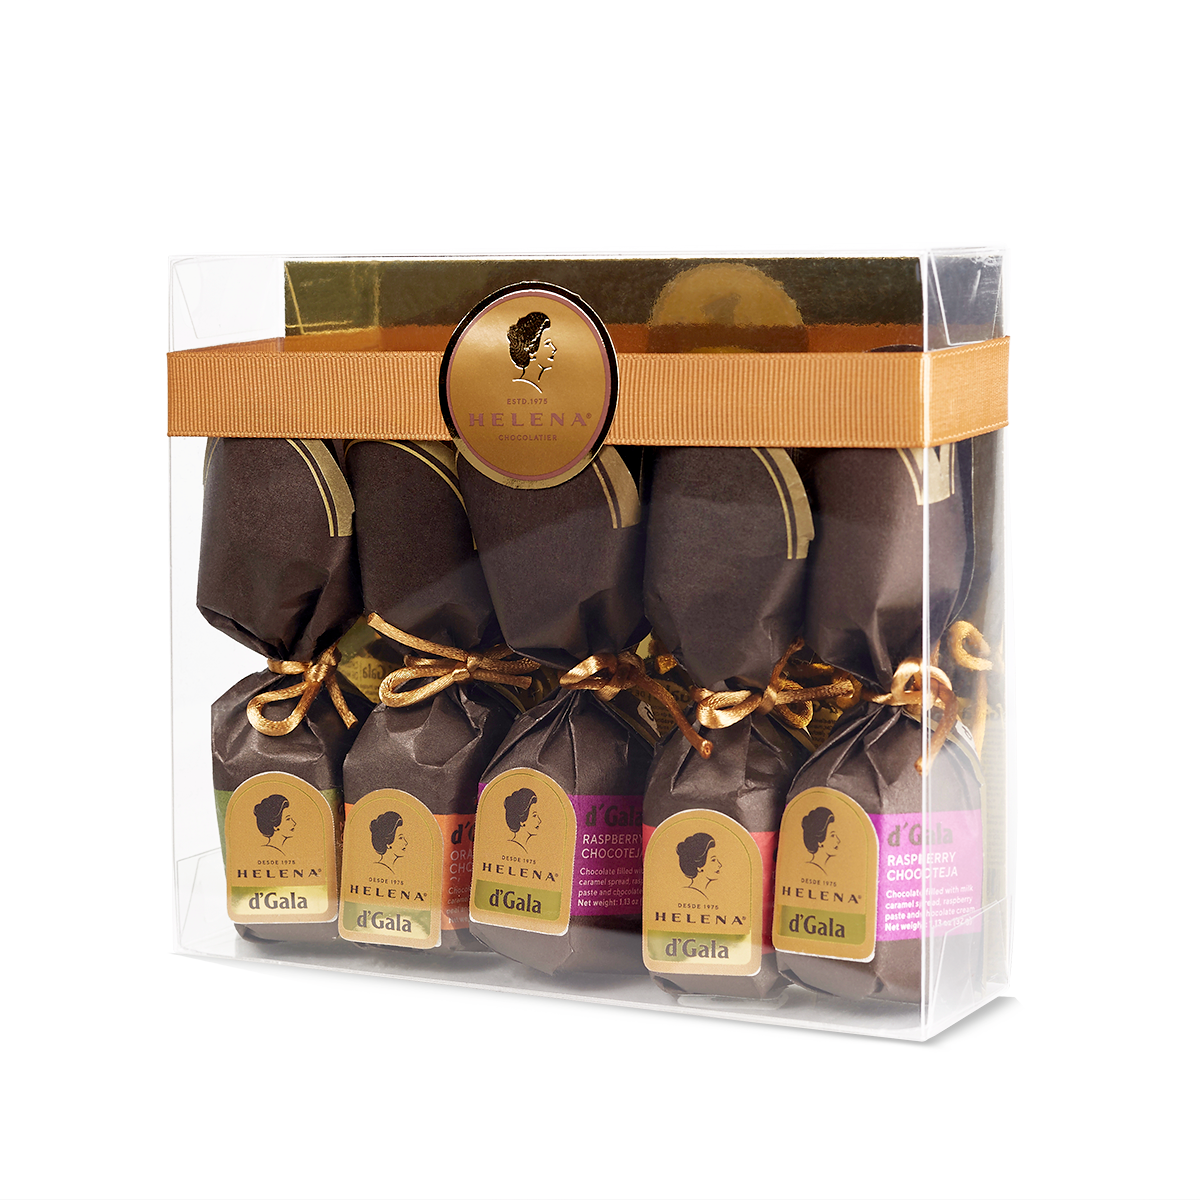 Deluxe Assorted Chocolates: 5-Pack, 5.65oz | 60% Cacao, Gluten-Free Truffles"